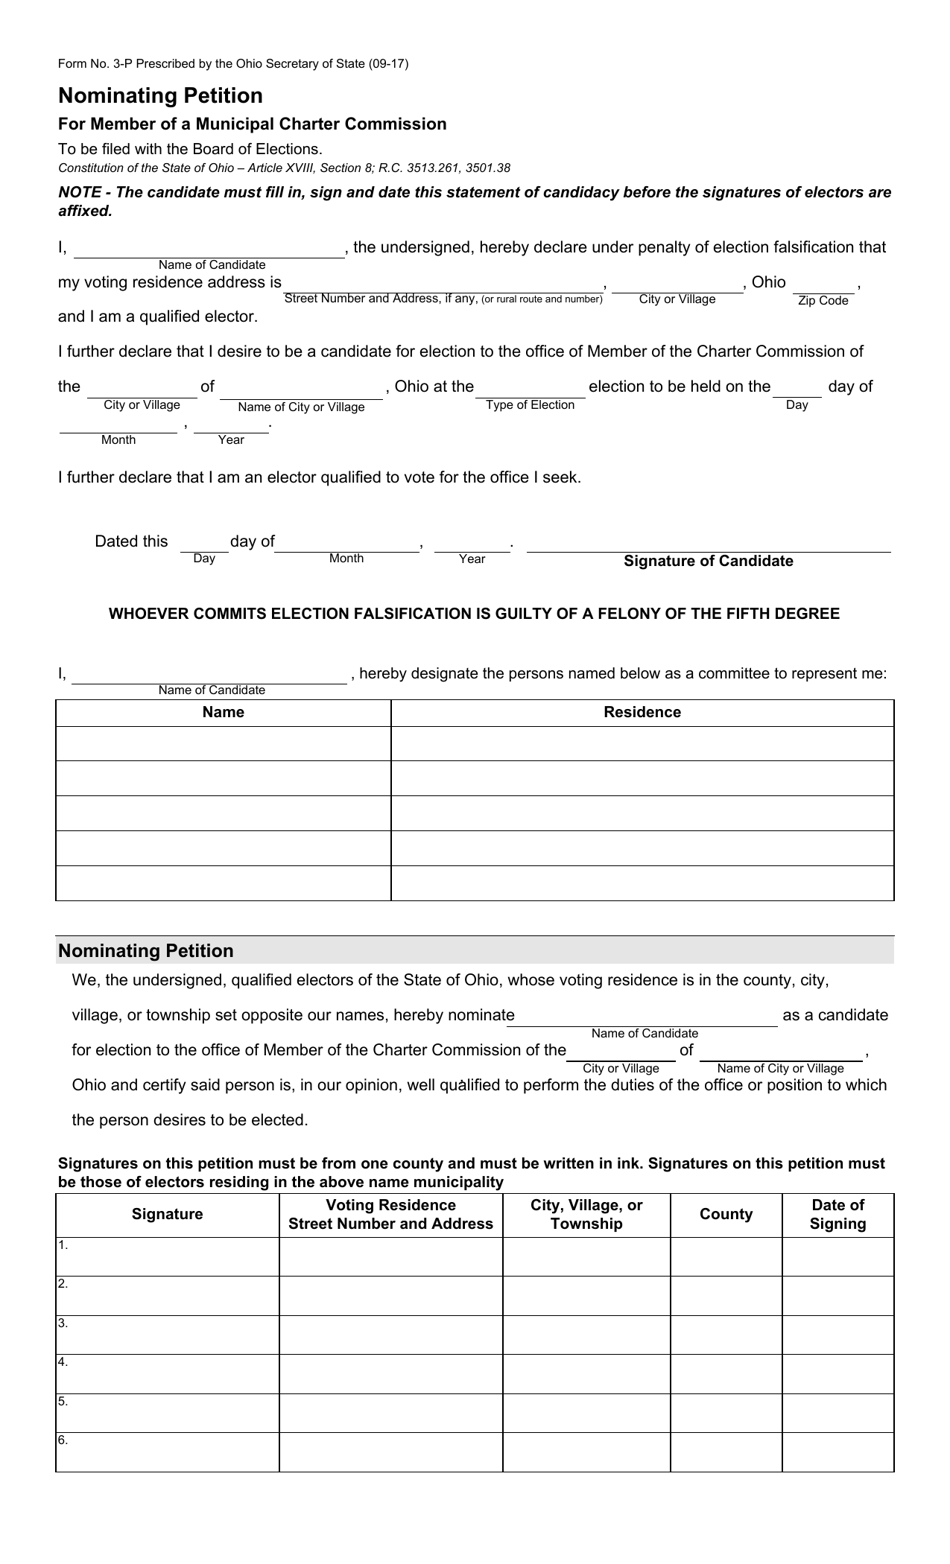 Form 3-P Nominating Petition for Member of a Municipal Charter Commission - Ohio, Page 1